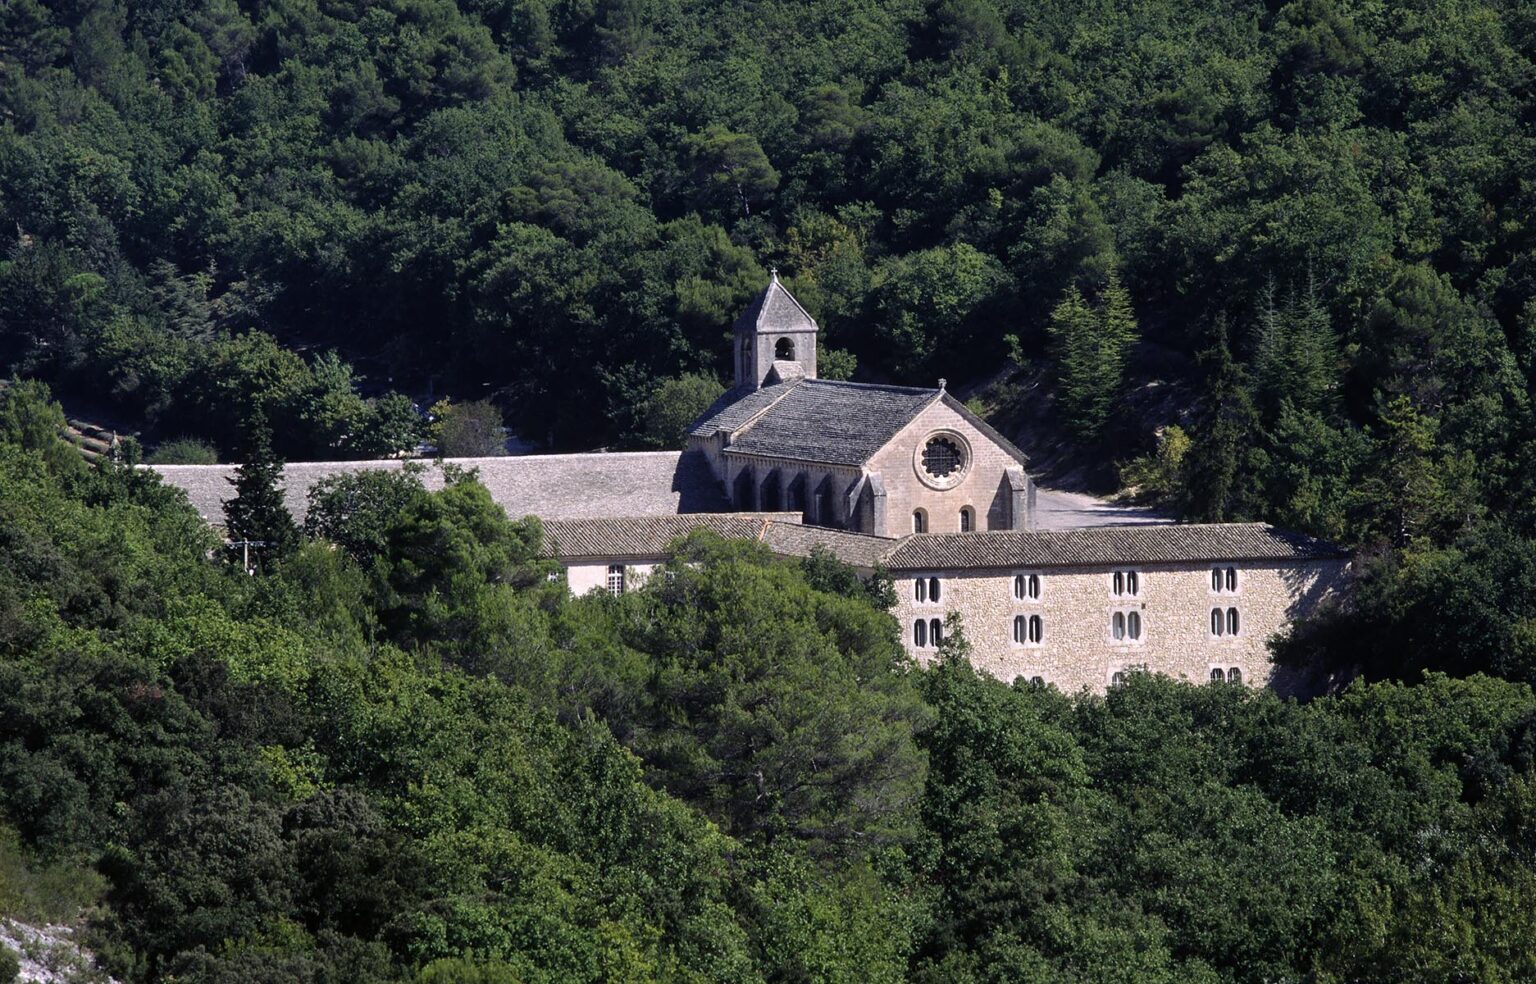 The SENAQUE ABBEY (12th Cent. CISTERCIAN) is one of the best preserved in the world - PROVENCE, FRANCE